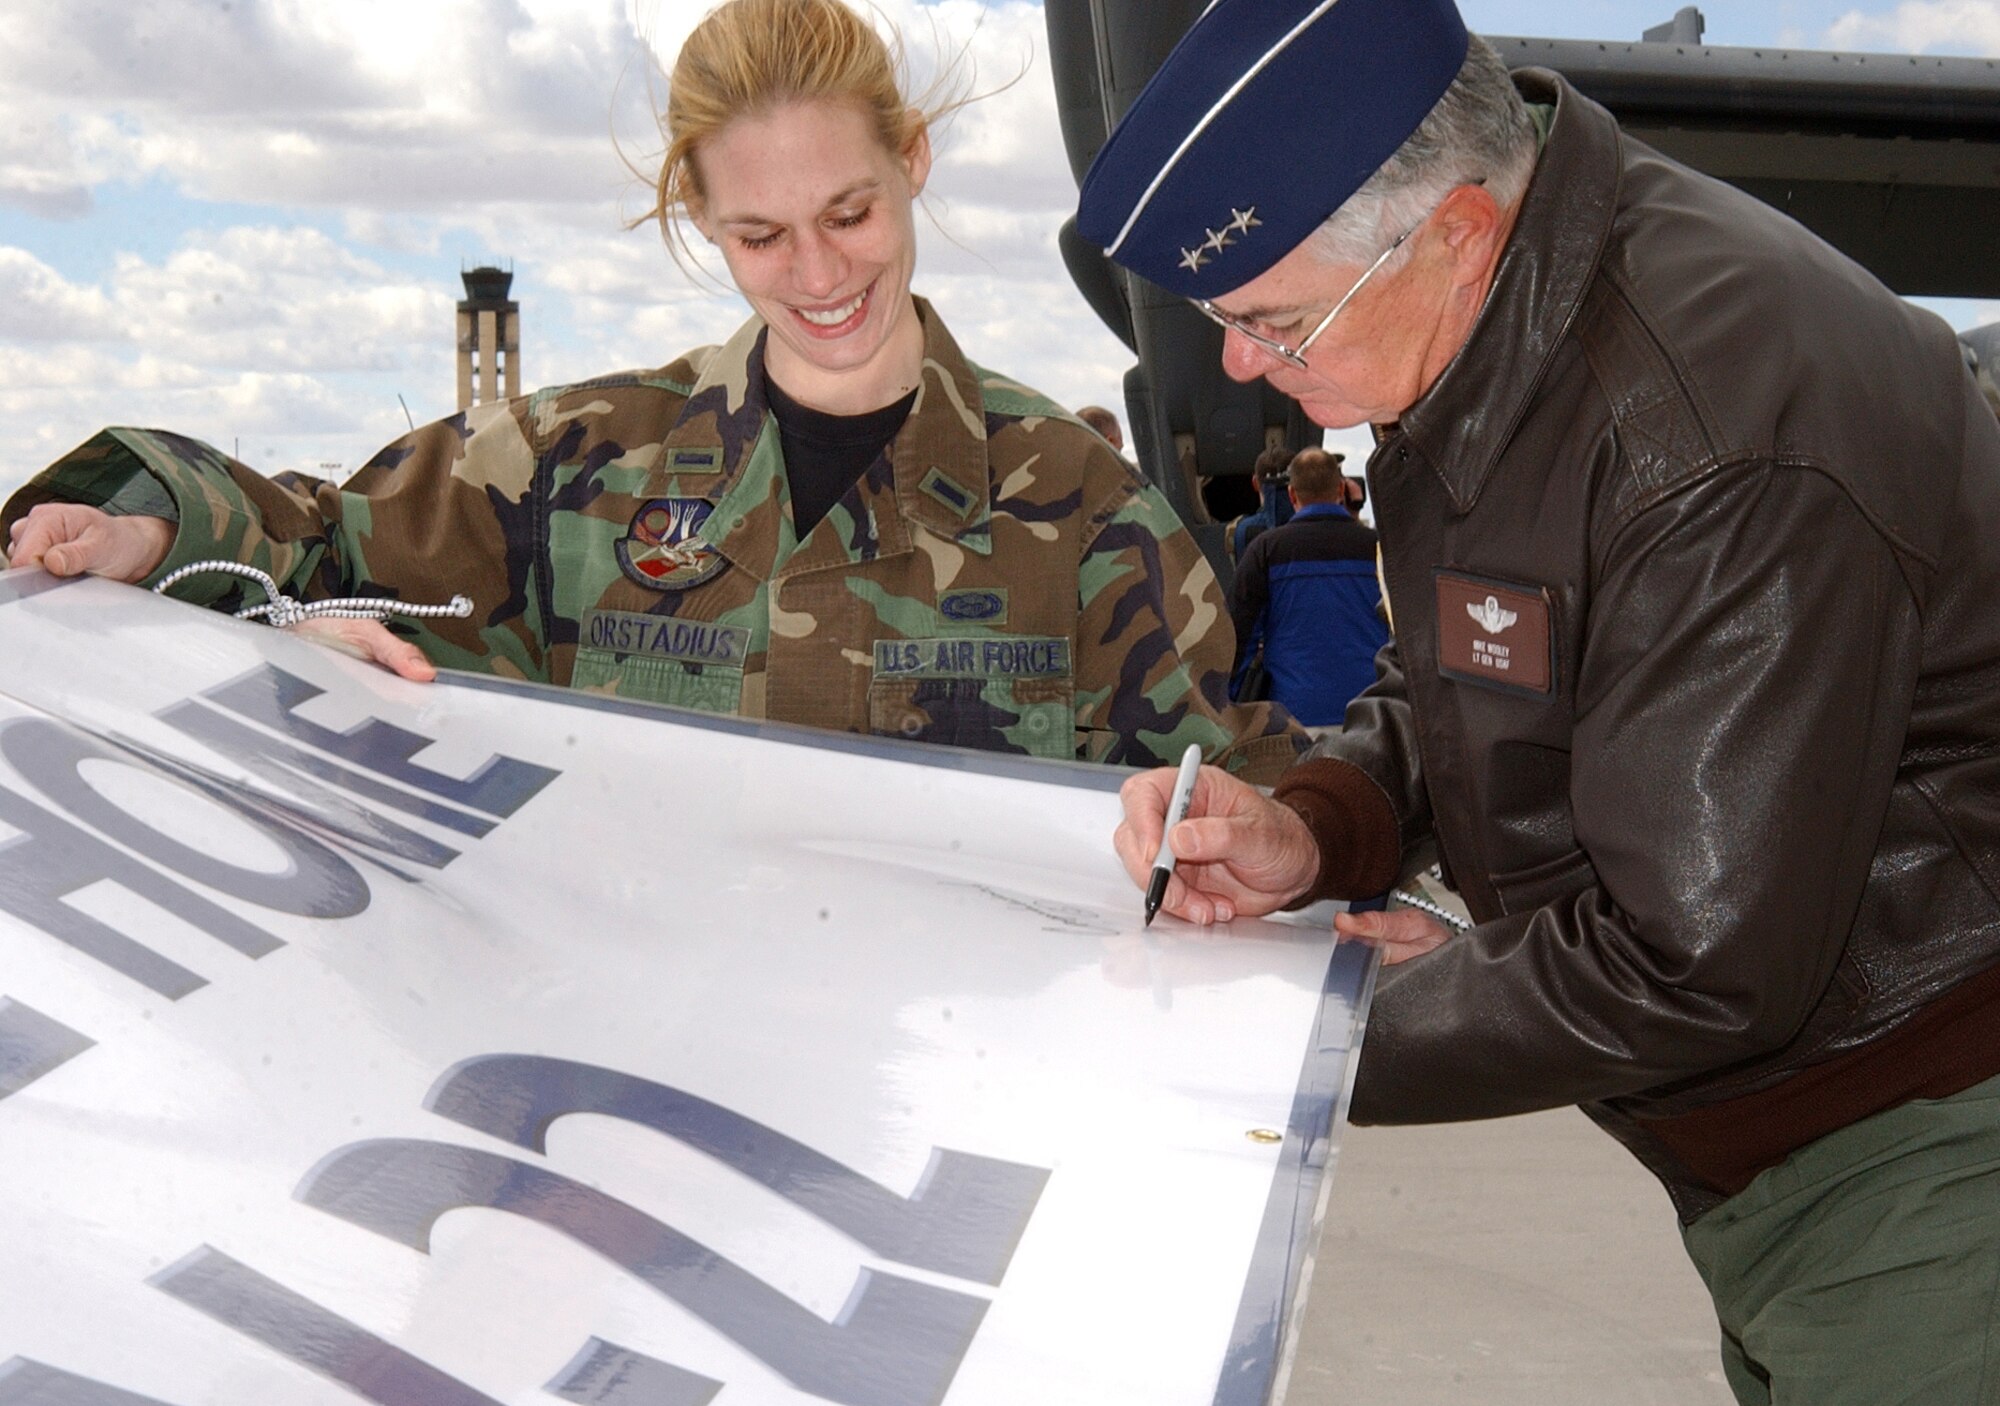 1st Lt. Anna Orstadius steadies a welcome banner while Lt. Gen. Mike Wooley, autographs it at Kirtland Air Force Base, N.M, after the first CV-22 Osprey arrived at the base Monday, March 20, 2006. General Wooley is commander of Air Force Special Operations Command. Lieutenant Orstadius is with the 58th Operational Support Squadron. (U.S. Air Force photo/Staff Sgt. Markus Maier)